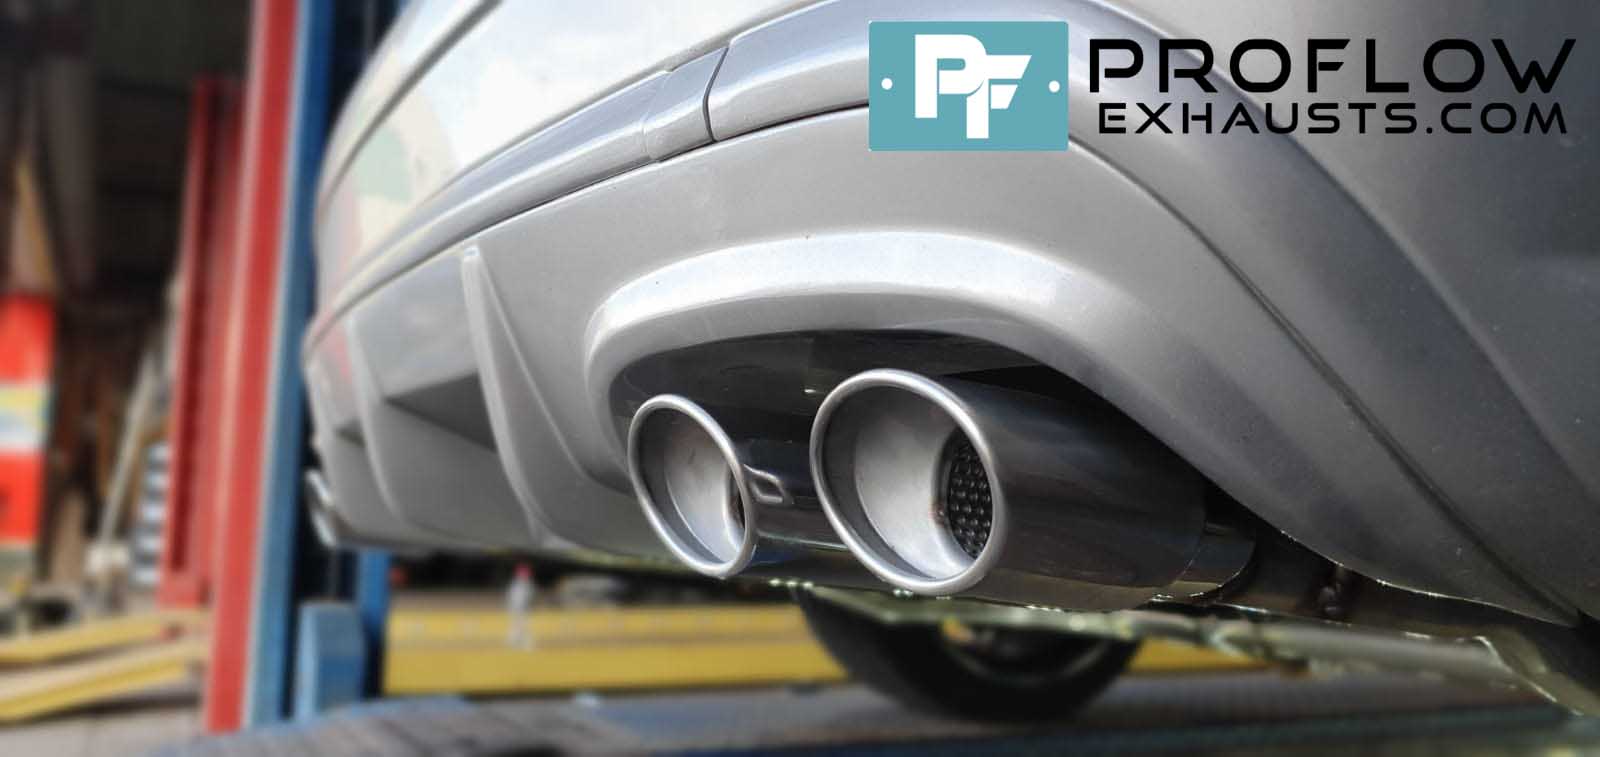 Mercedes CLK Custom Exhaust Dual Exit Built From Stainless Steel (3)